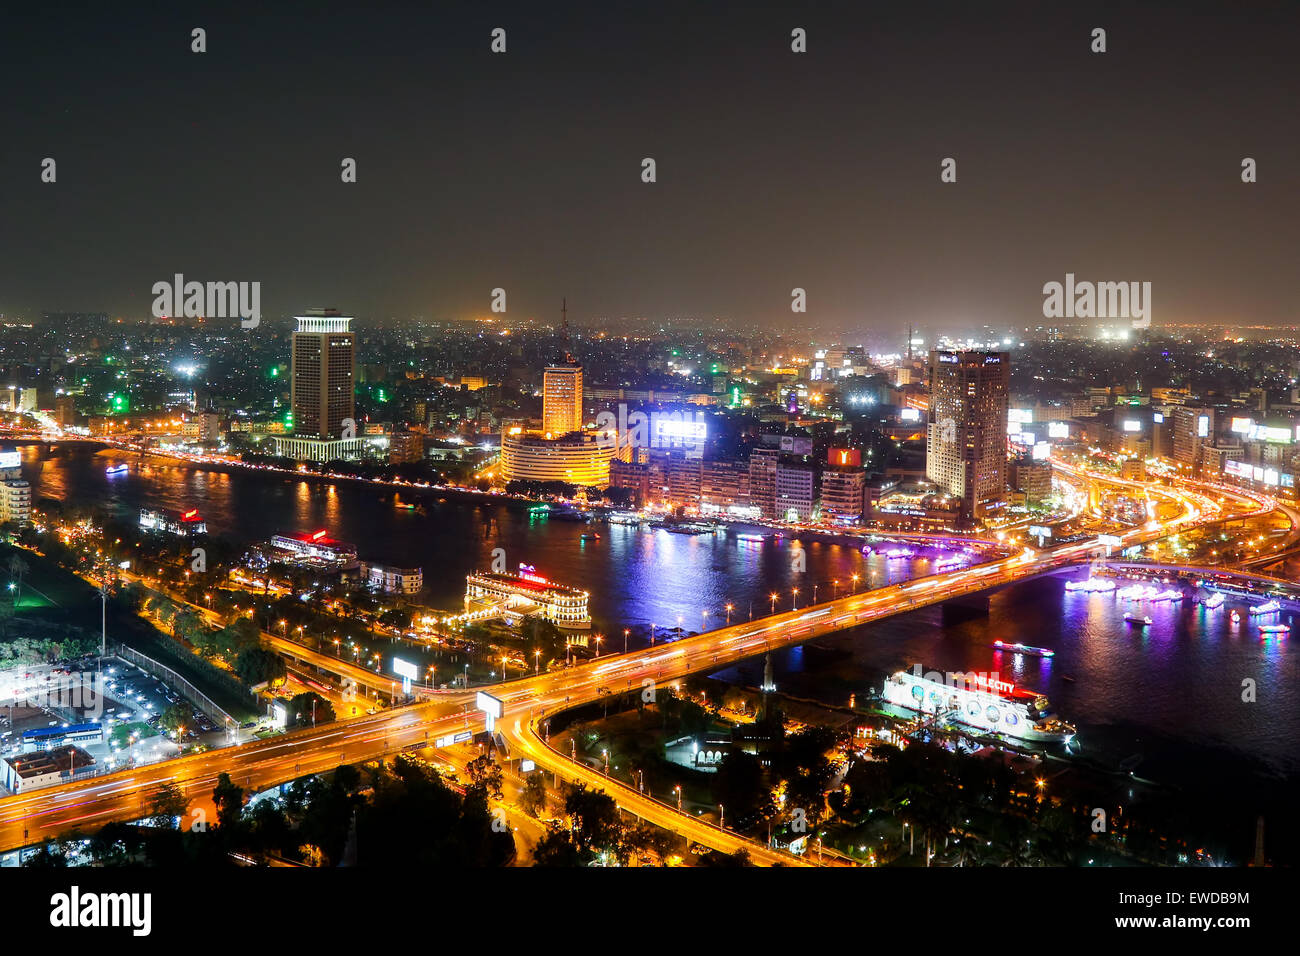 Overlooking the city of Cairo at night. Stock Photo